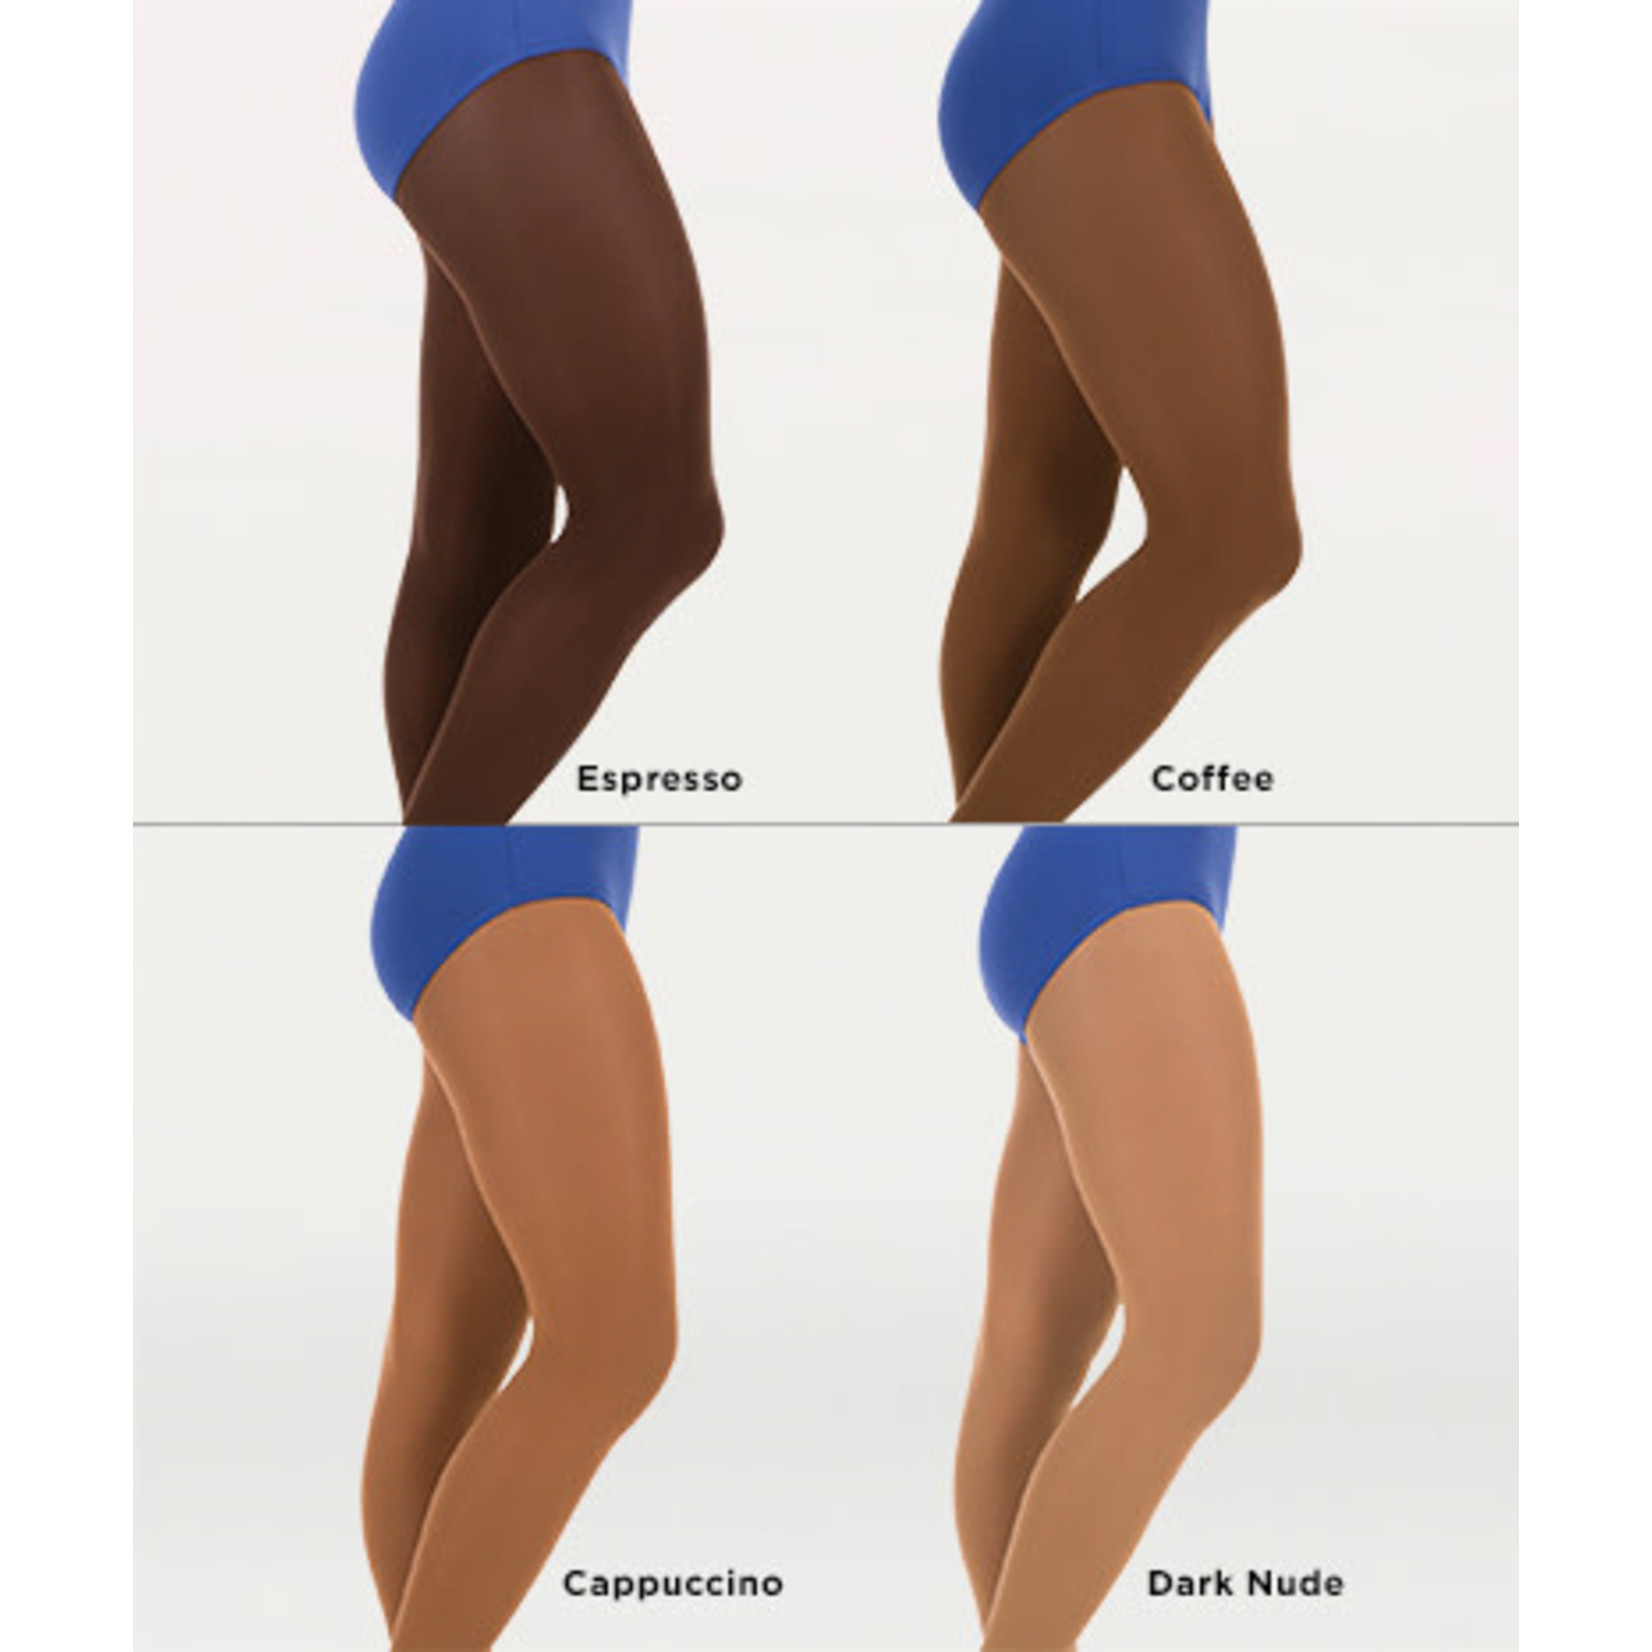 Body Wrappers C45 Mesh Back Seam Convertible Tights